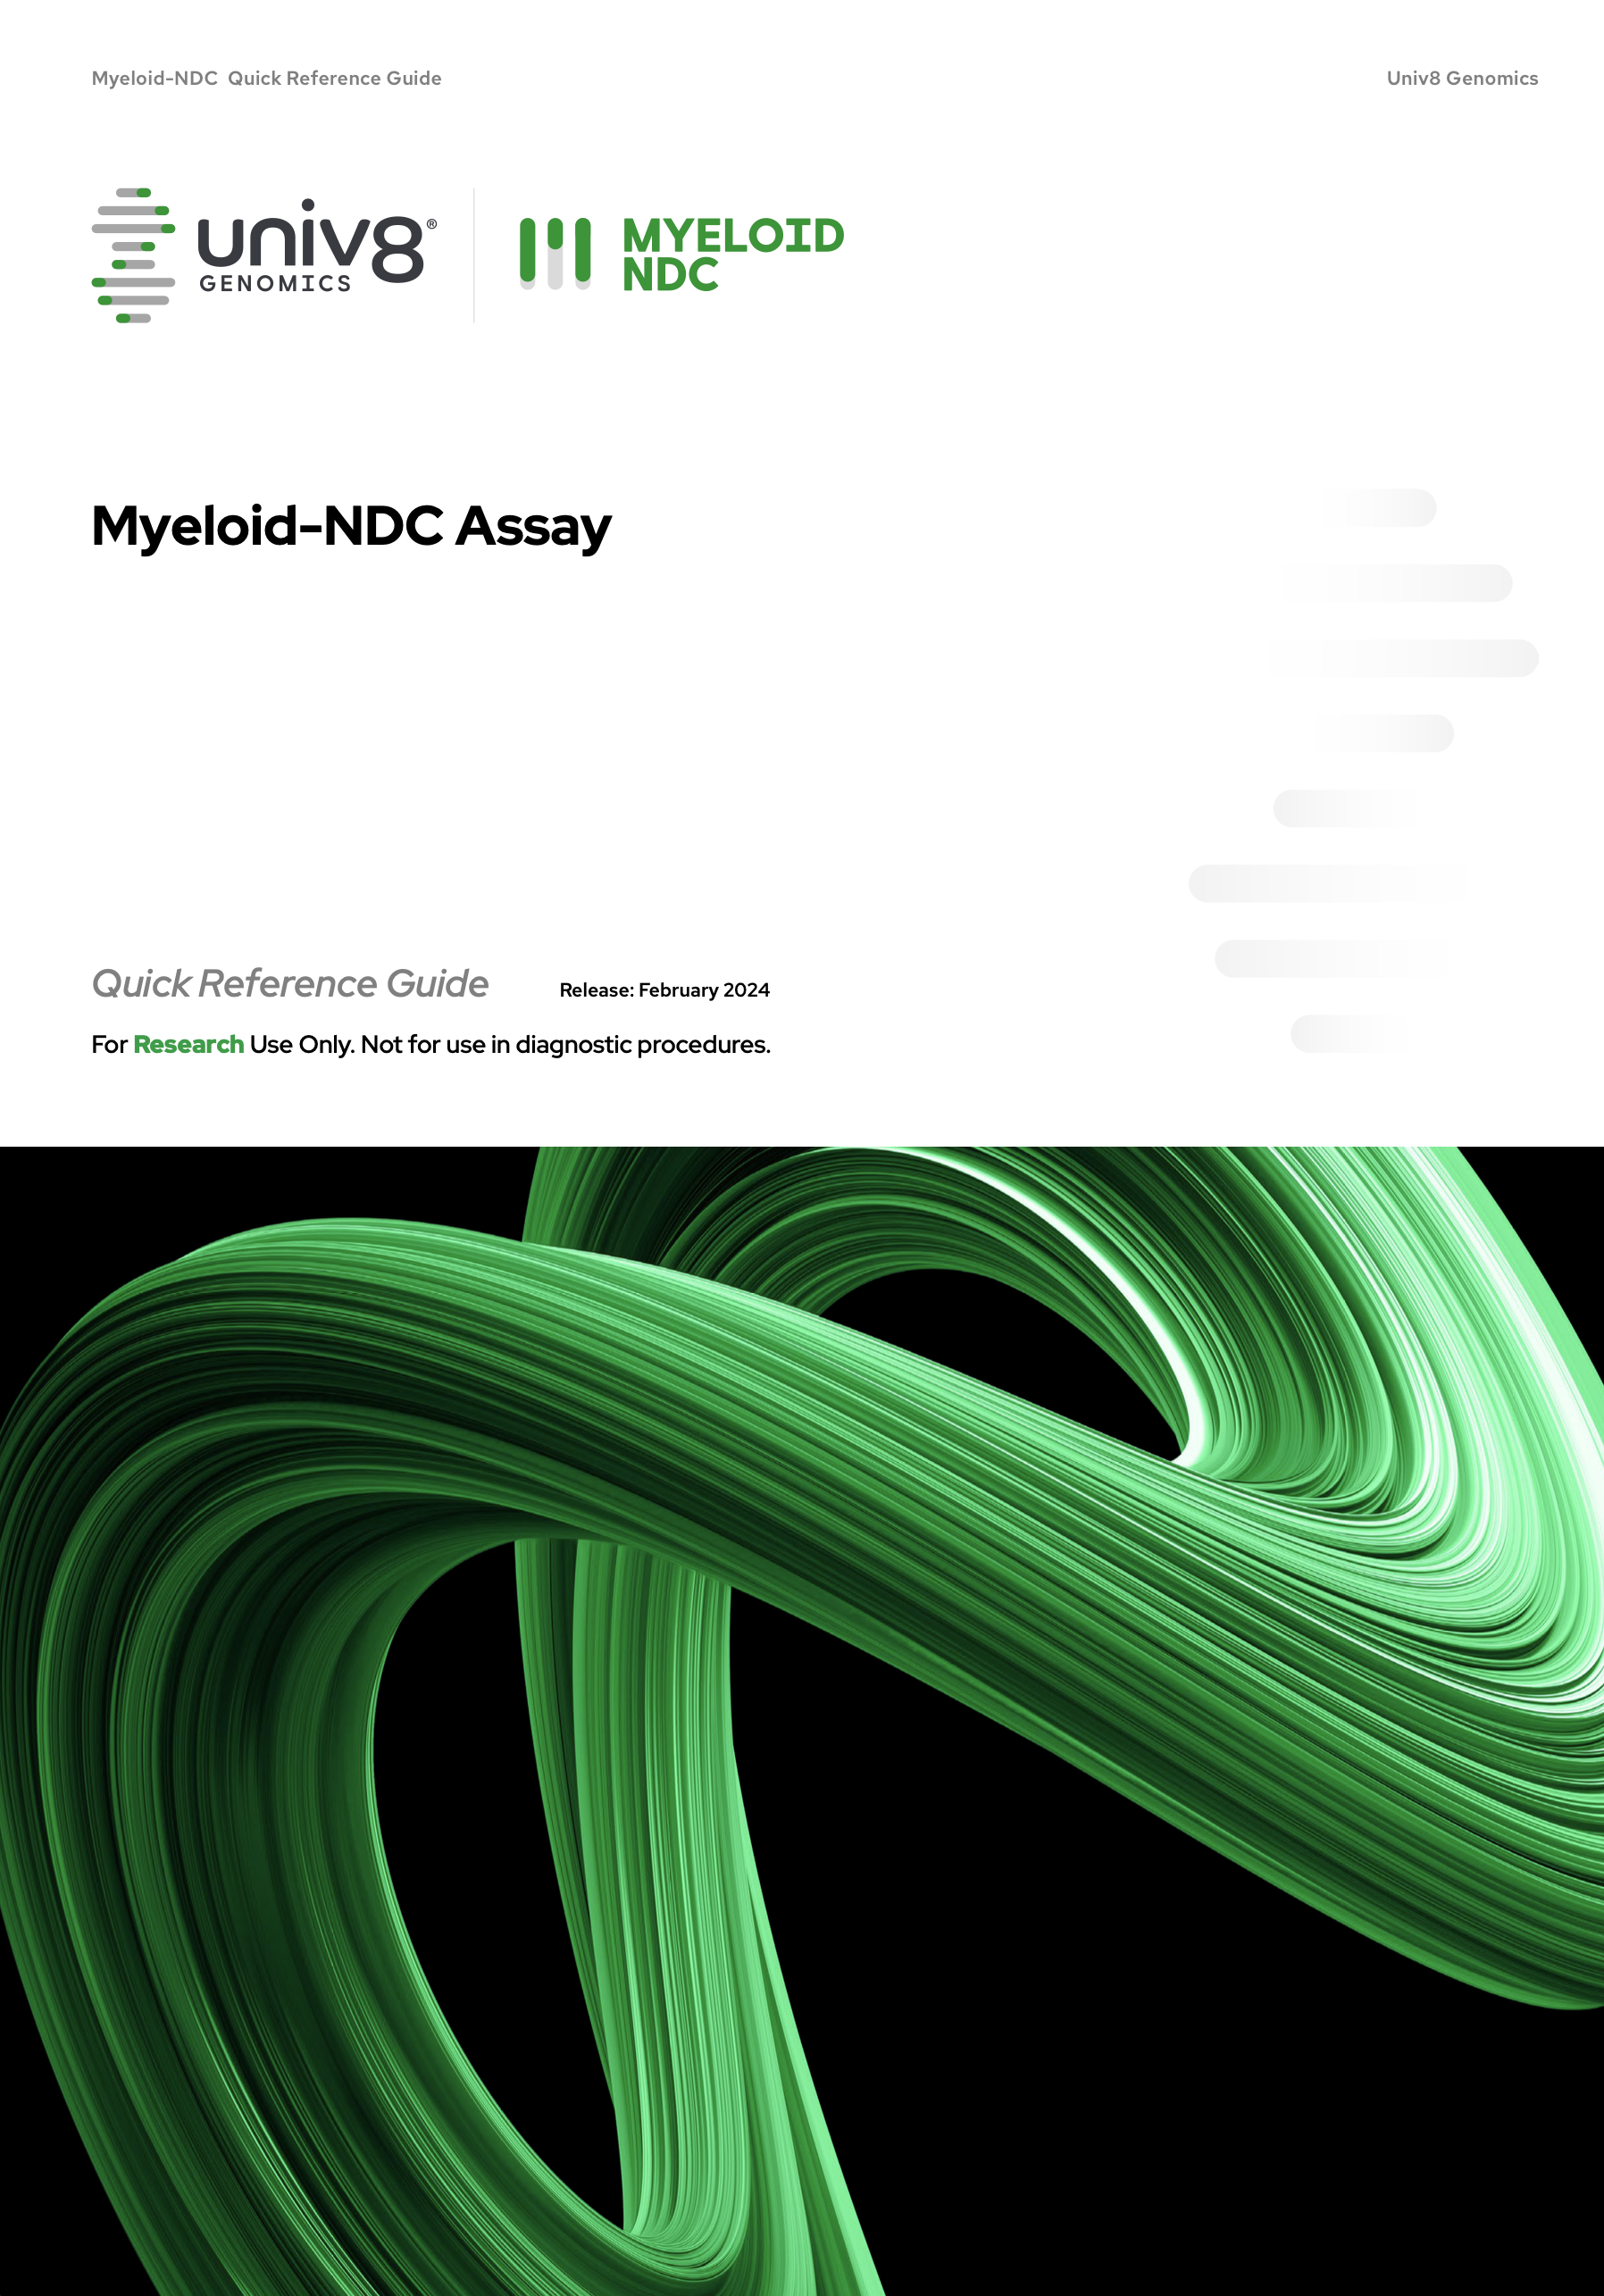 Myeloid-NDC Assay Quick Reference Guide